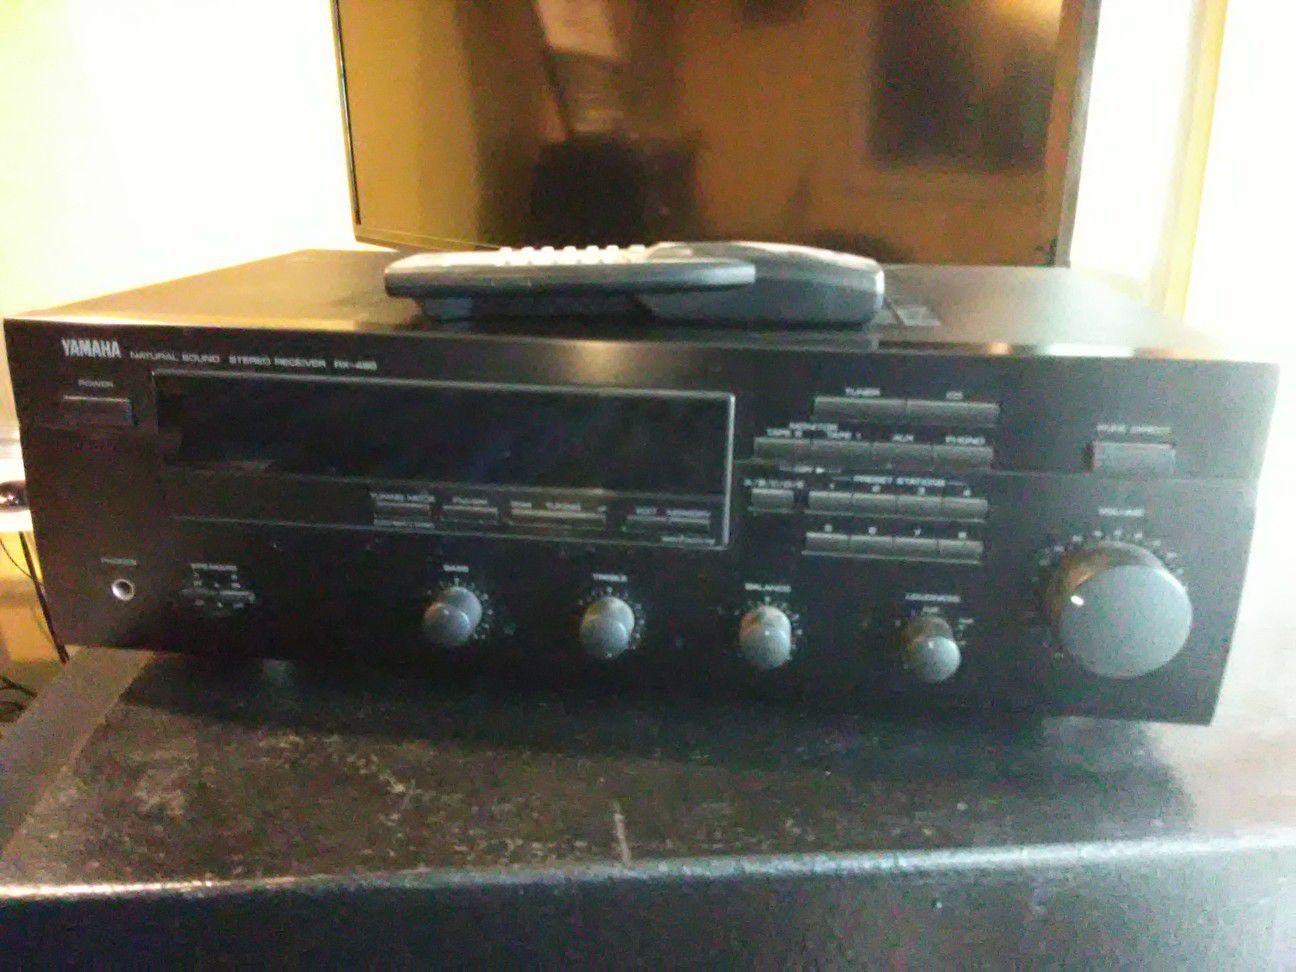 300 Watts Yamaha receiver with remote control